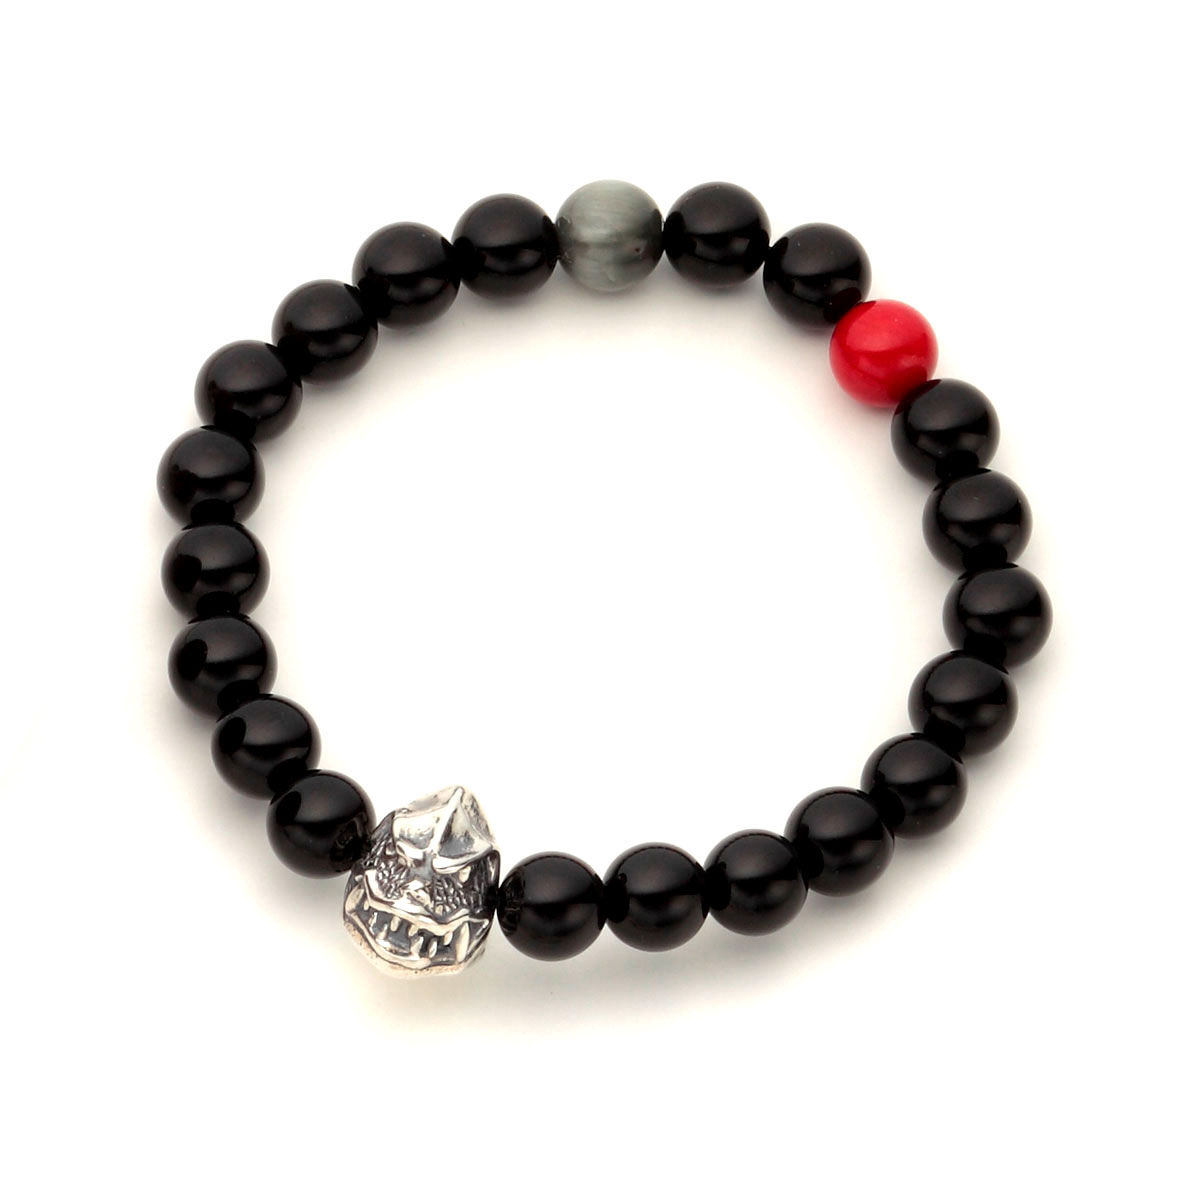 Red King Stone Bracelet—Ultra Series/JAM HOME MADE Collaboration